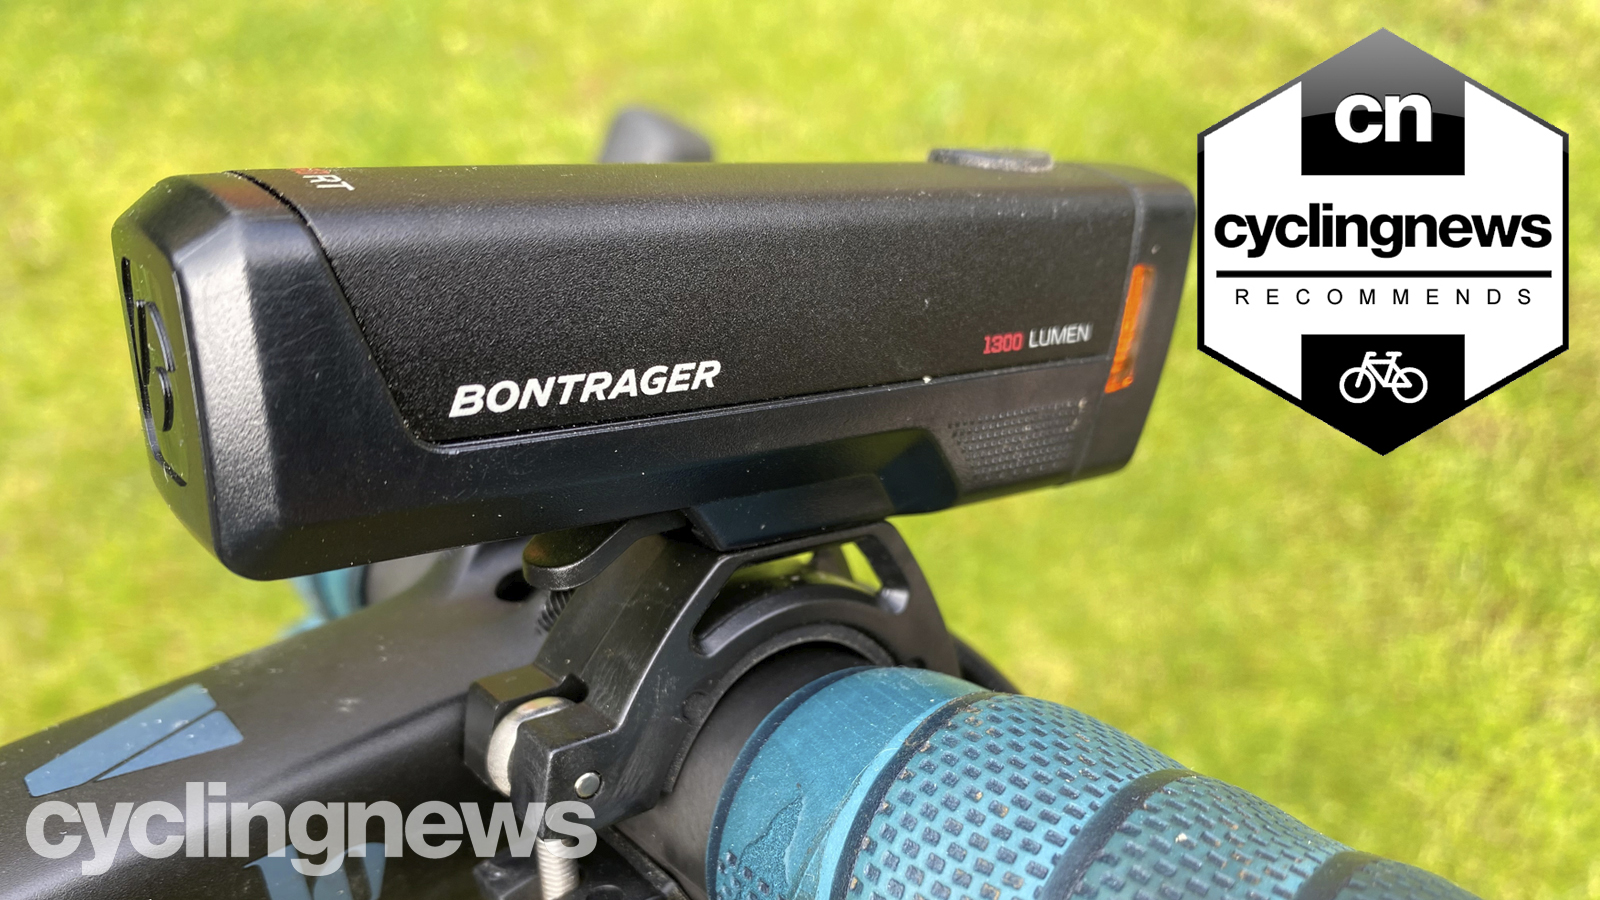 Bontrager Ion Pro 1300 light review | Cyclingnews